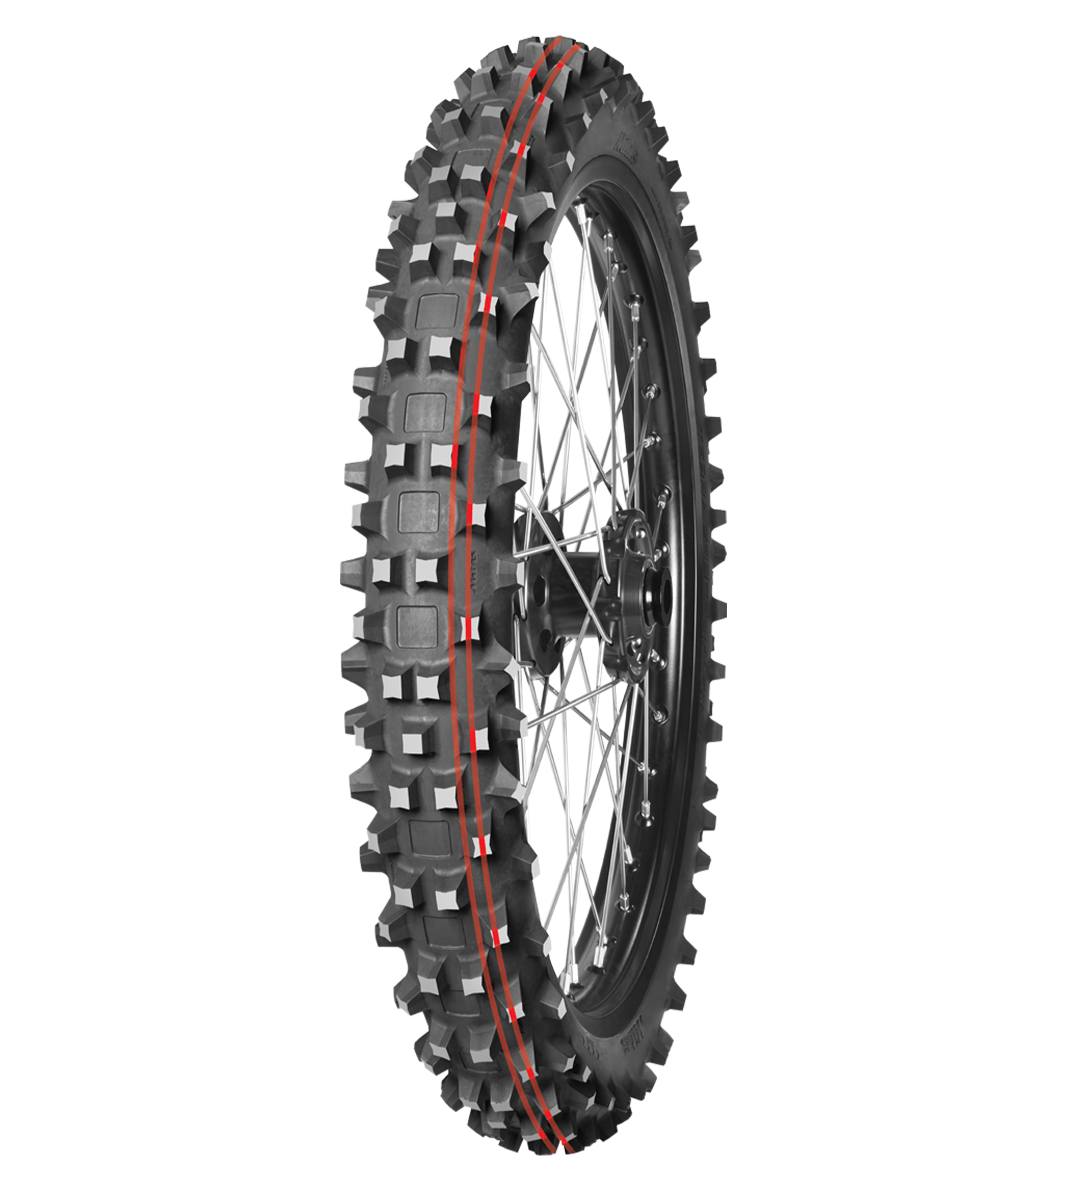 Mitas TERRA FORCE-MX Sand 80/100-21 Motocross Competition Off-Road Sand 51M 2 Red Tube Front Tire, 226719, 80/100-21, Front, Motocross, Motocross Competition, Off-Road, Terra Force, Terra Force-MX Sand, Trail, Tires - Imported and distributed in North & South America by Lindeco Genuine Powersports - Premier Powersports Equipment and Accessories for Motorcycle Enthusiasts, Professional Riders and Dealers.